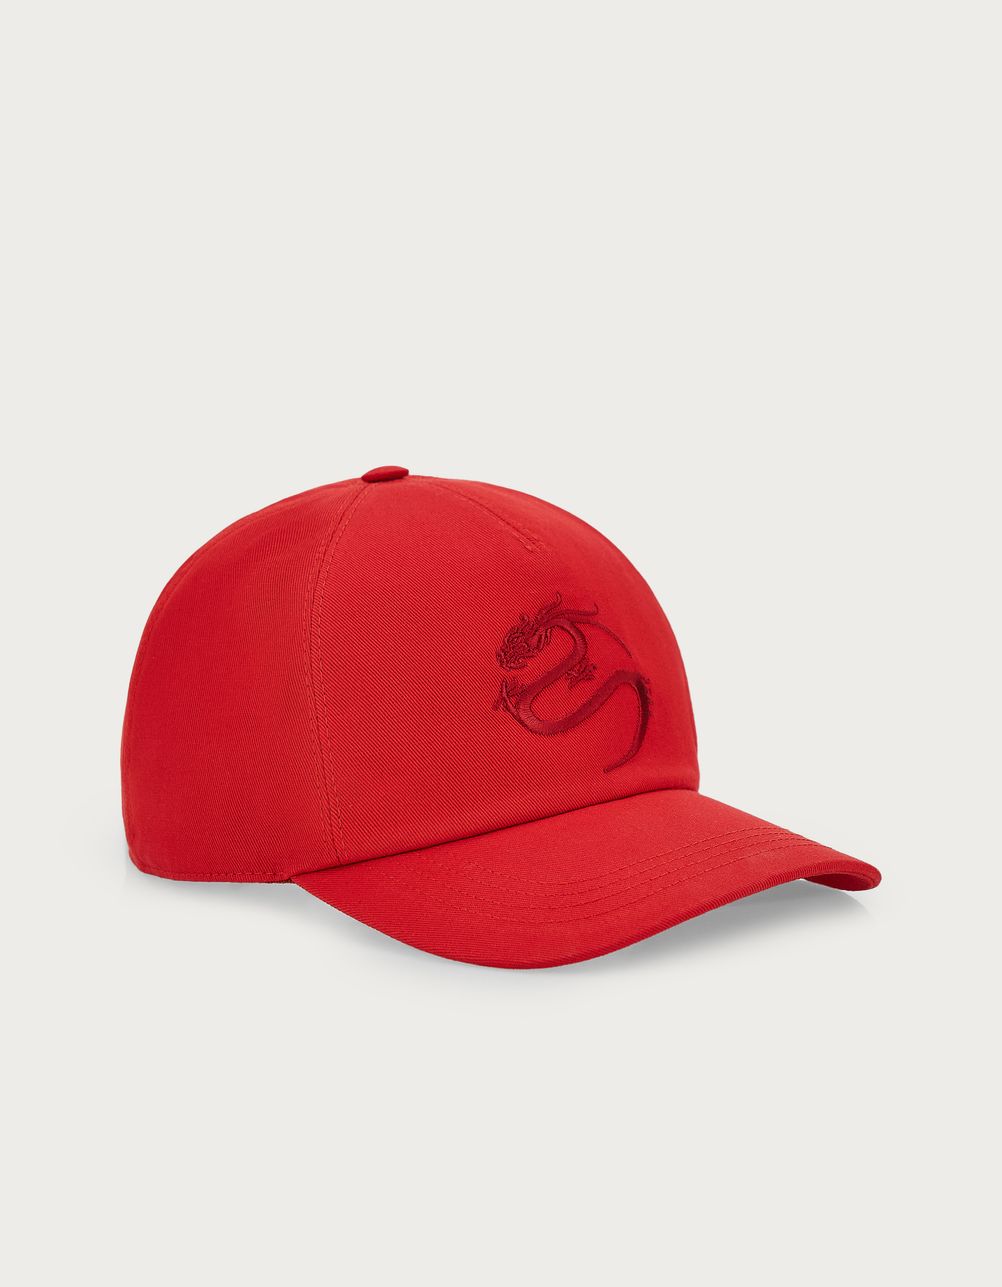 Baseball cap in red cotton